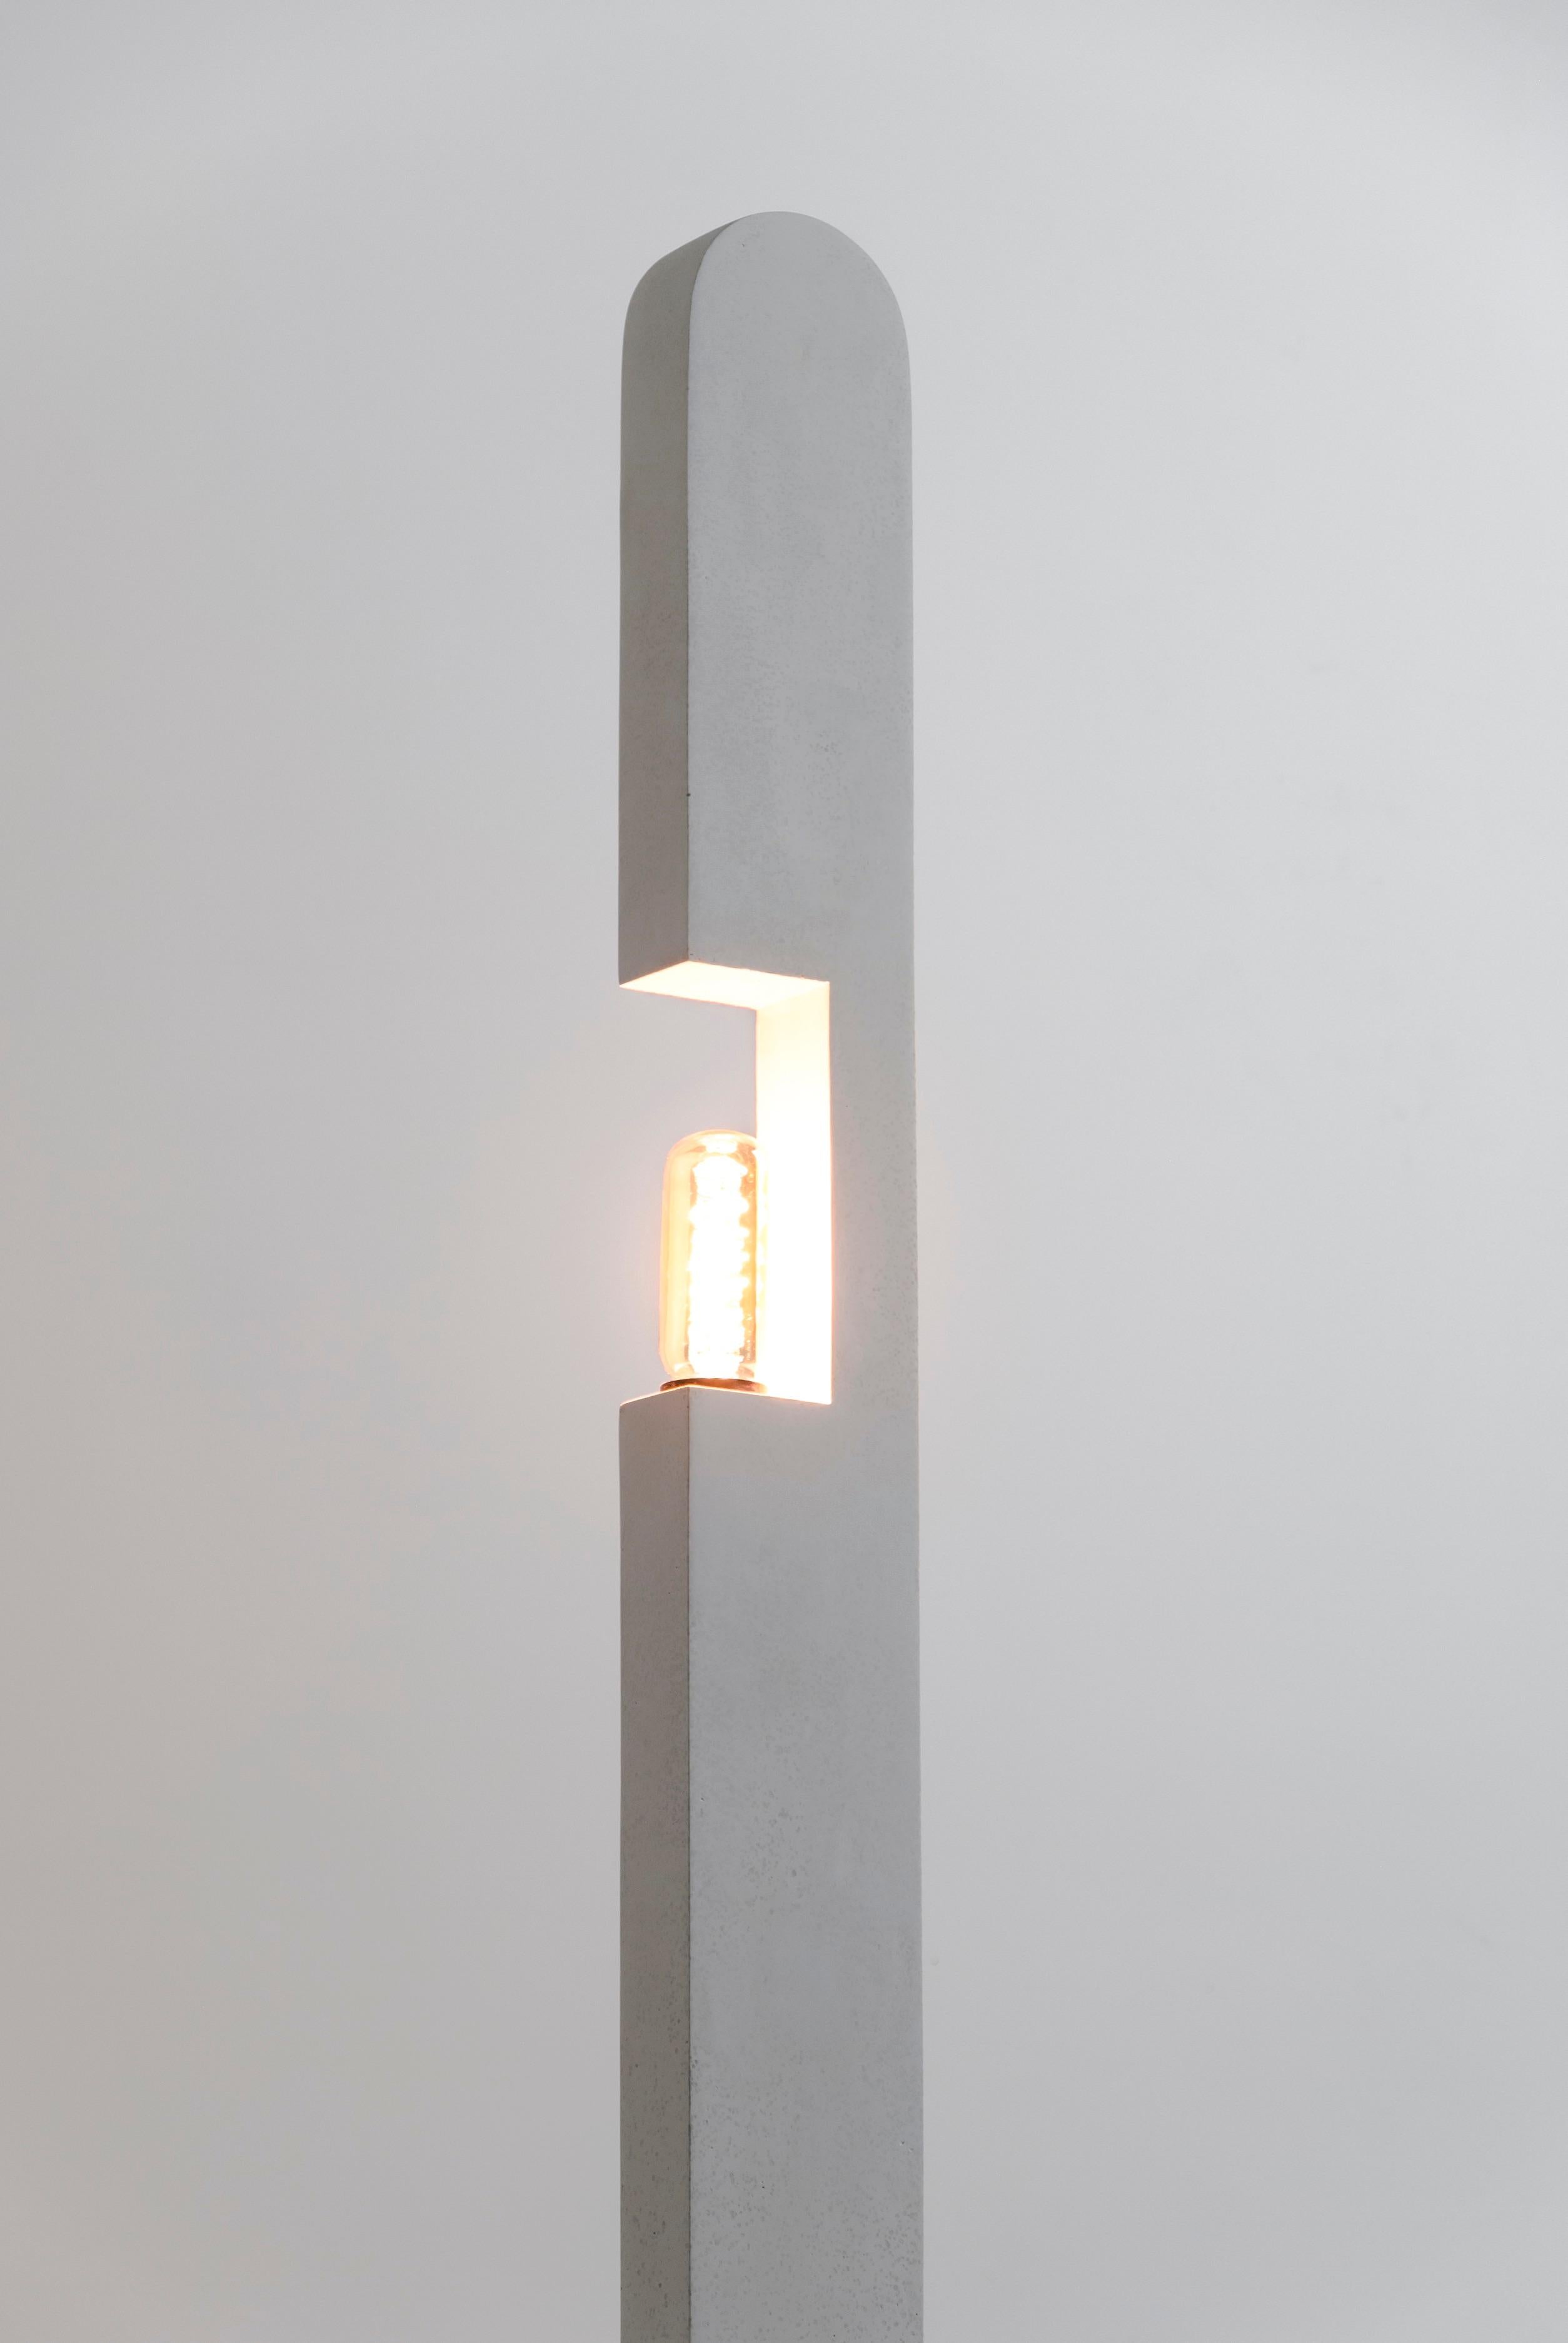 This minimalistic floor lamp is handmade by emerging artist and designer Bailey Fontaine. The Pillar Floor Lamp is meant to mimic architectural forms, and the feeling of viewing lights through a window in a big city. Bailey Fontaine's sculpting